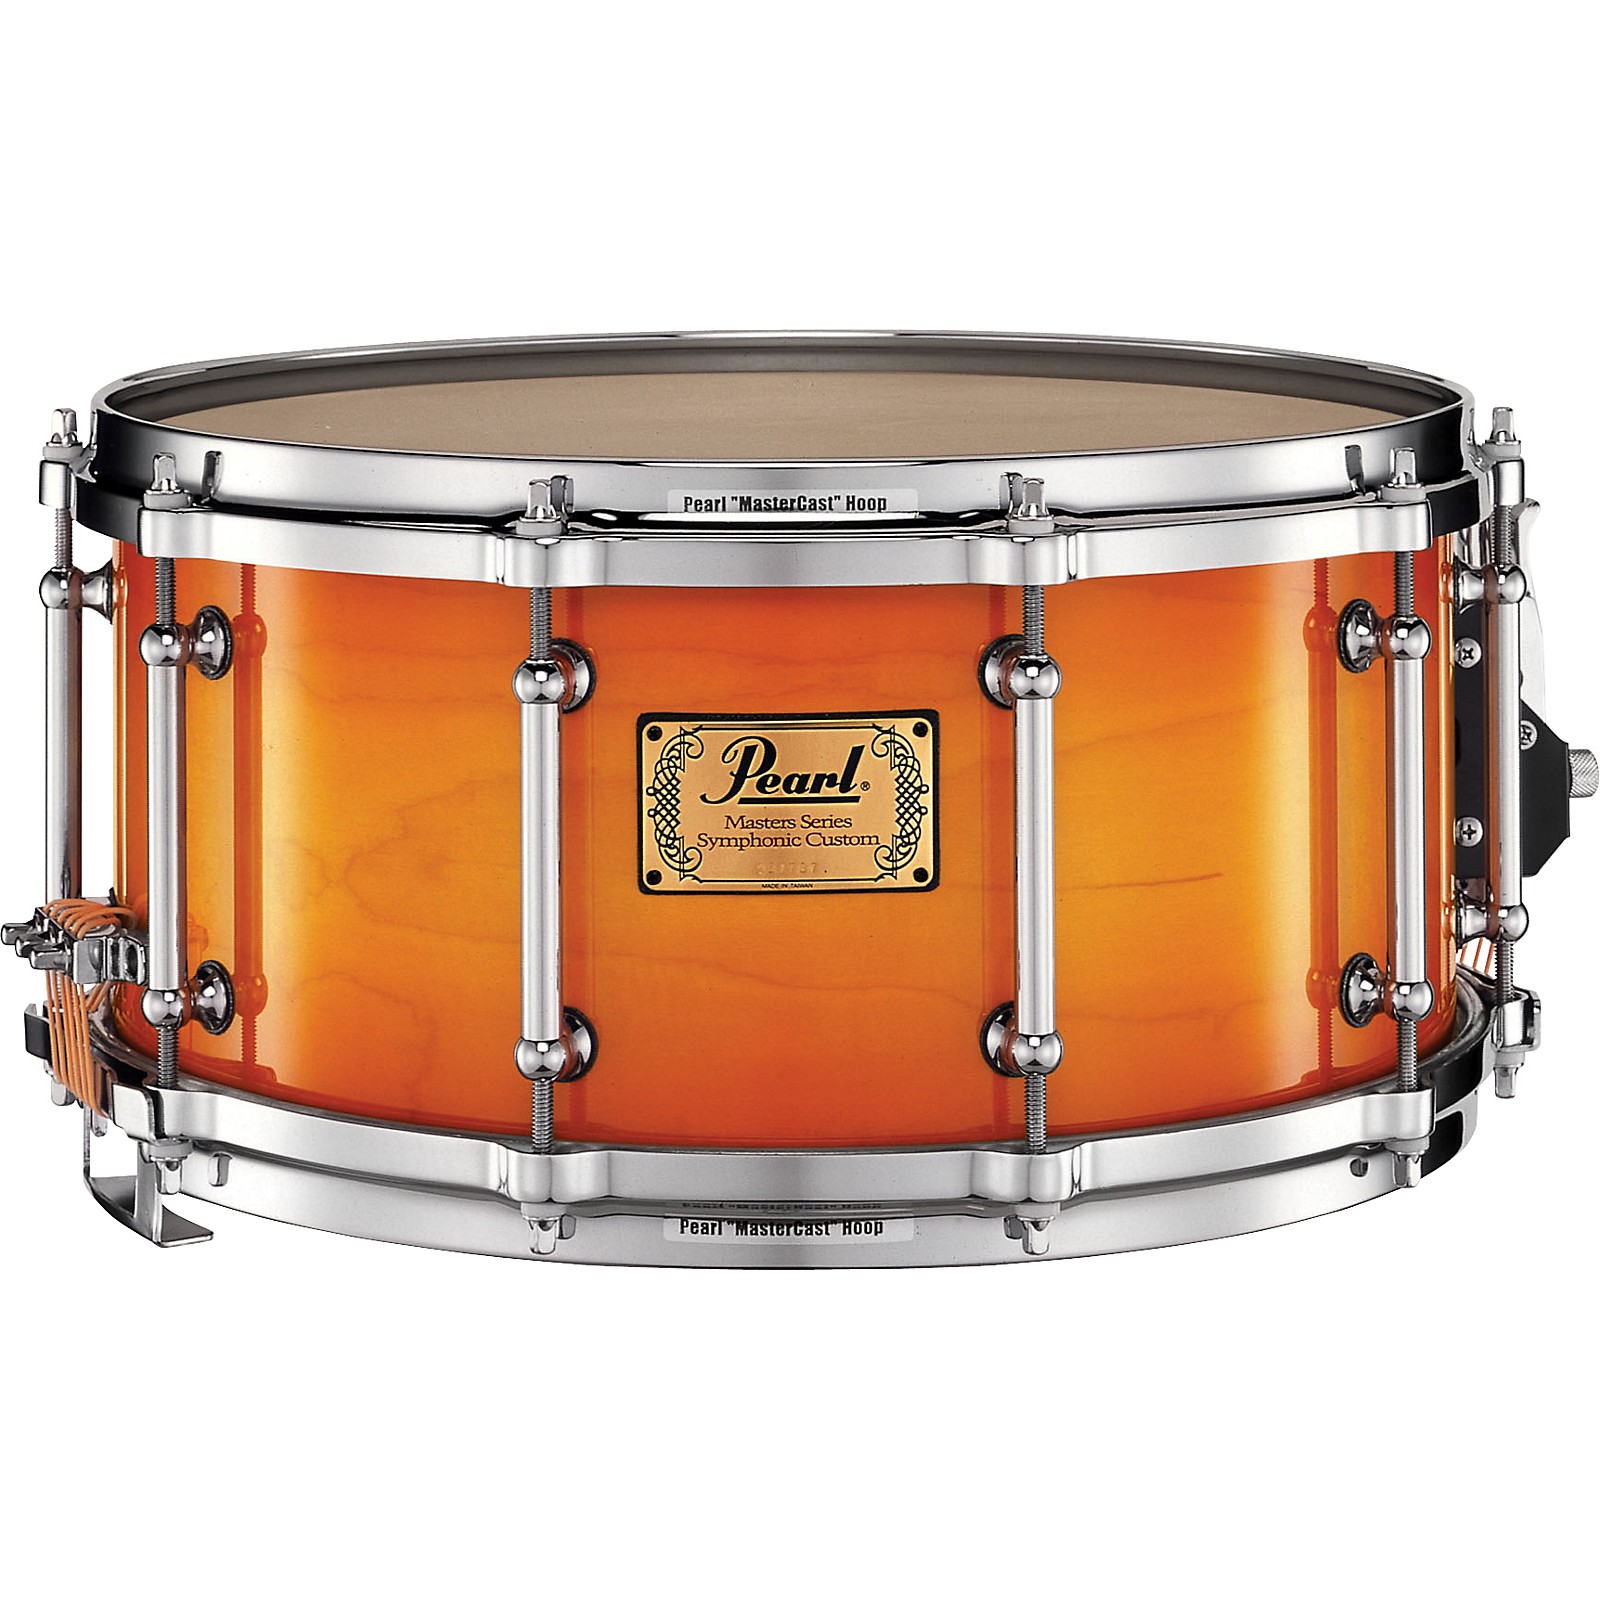 Pearl Pearl Symphonic Snare Drum